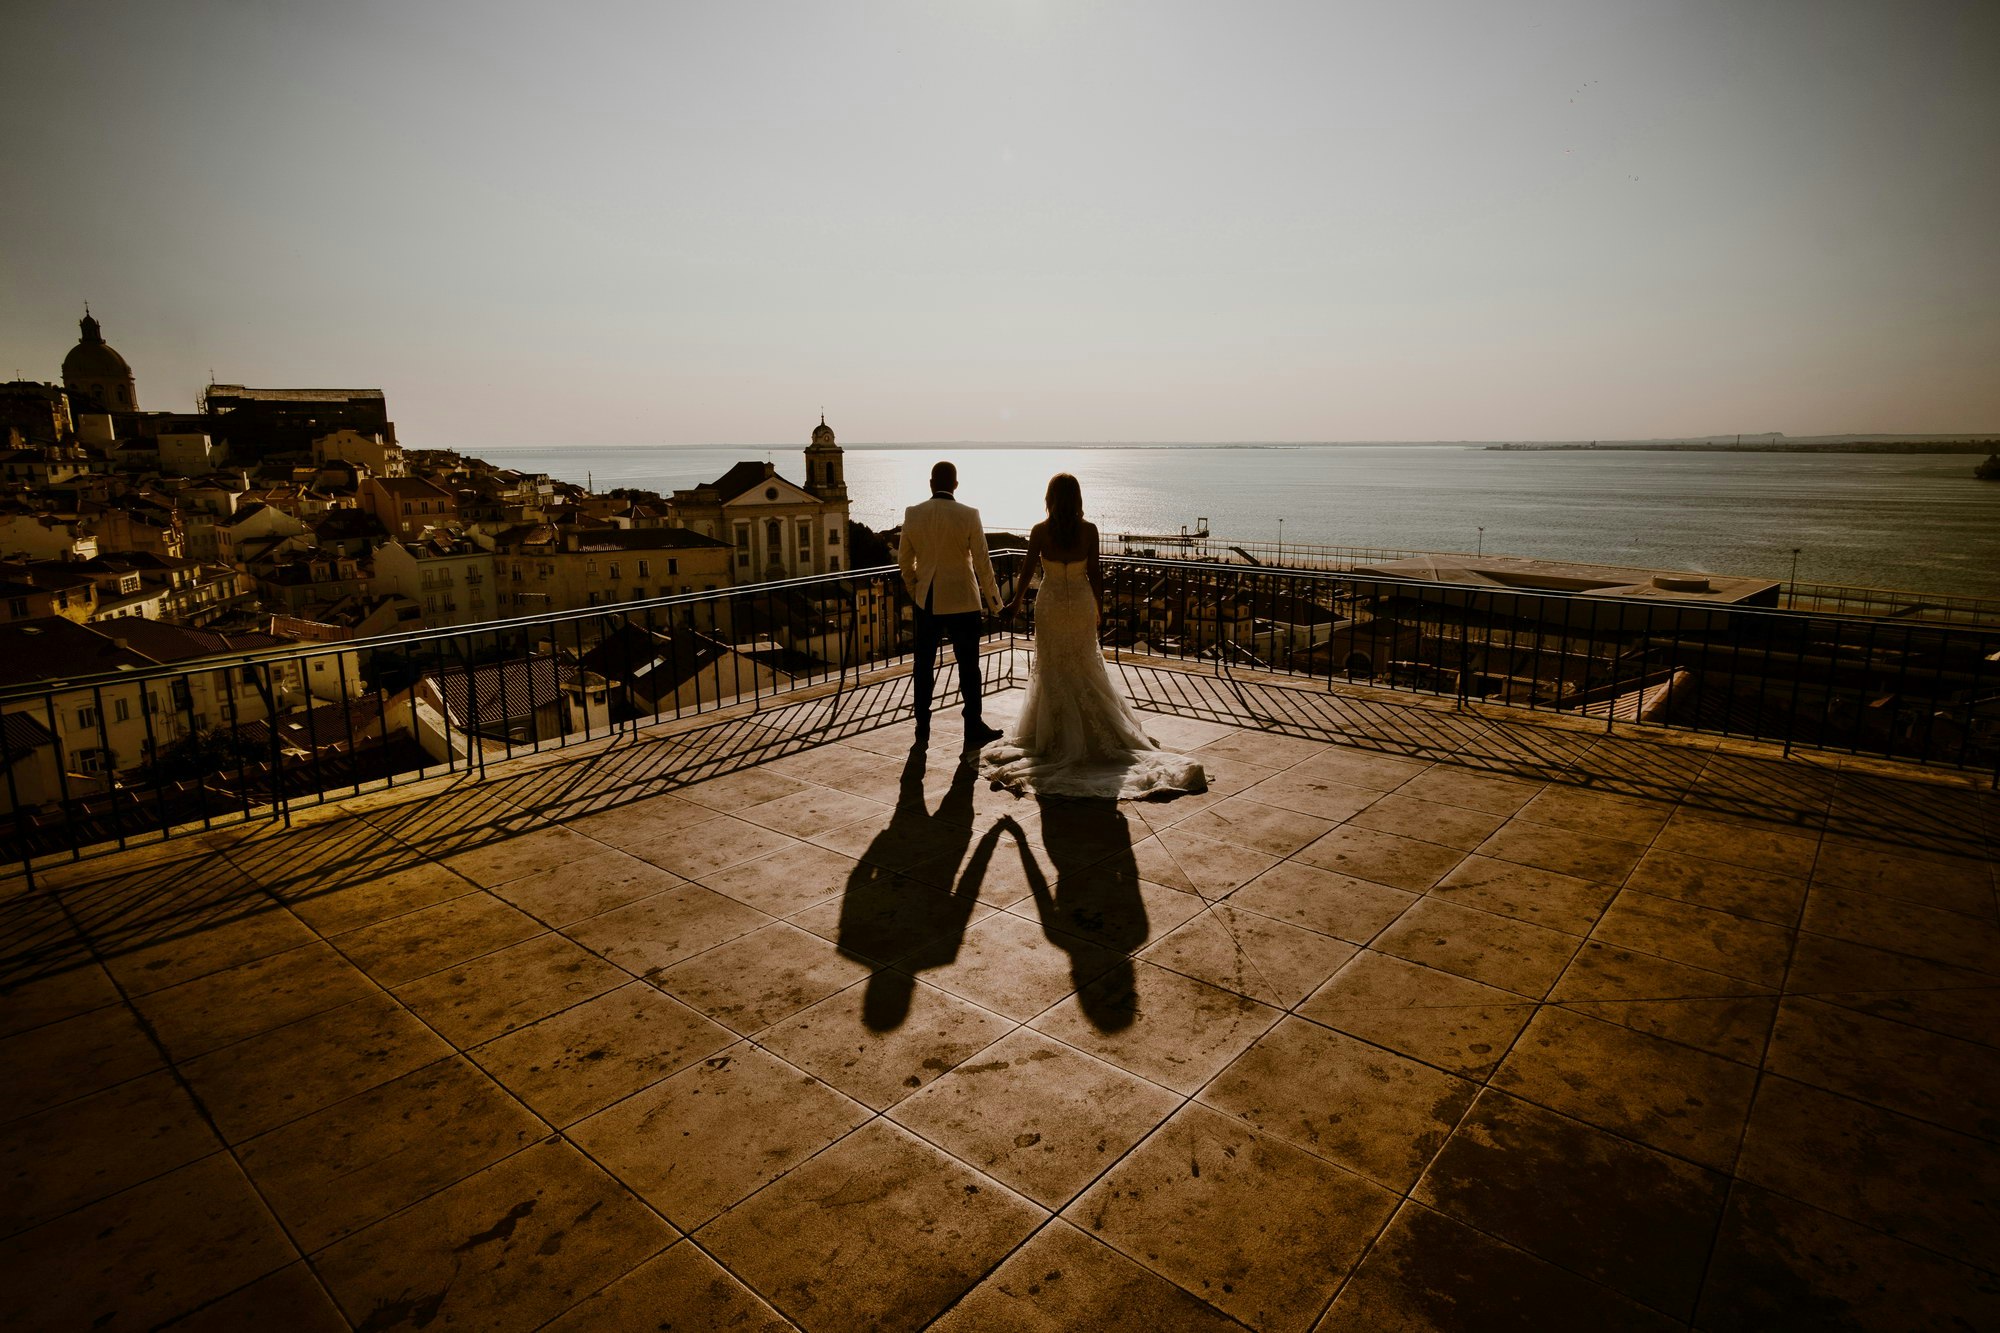 A bride and groom stand on a terrace with their backs to camera, gazing out over the sun setting on the sea.